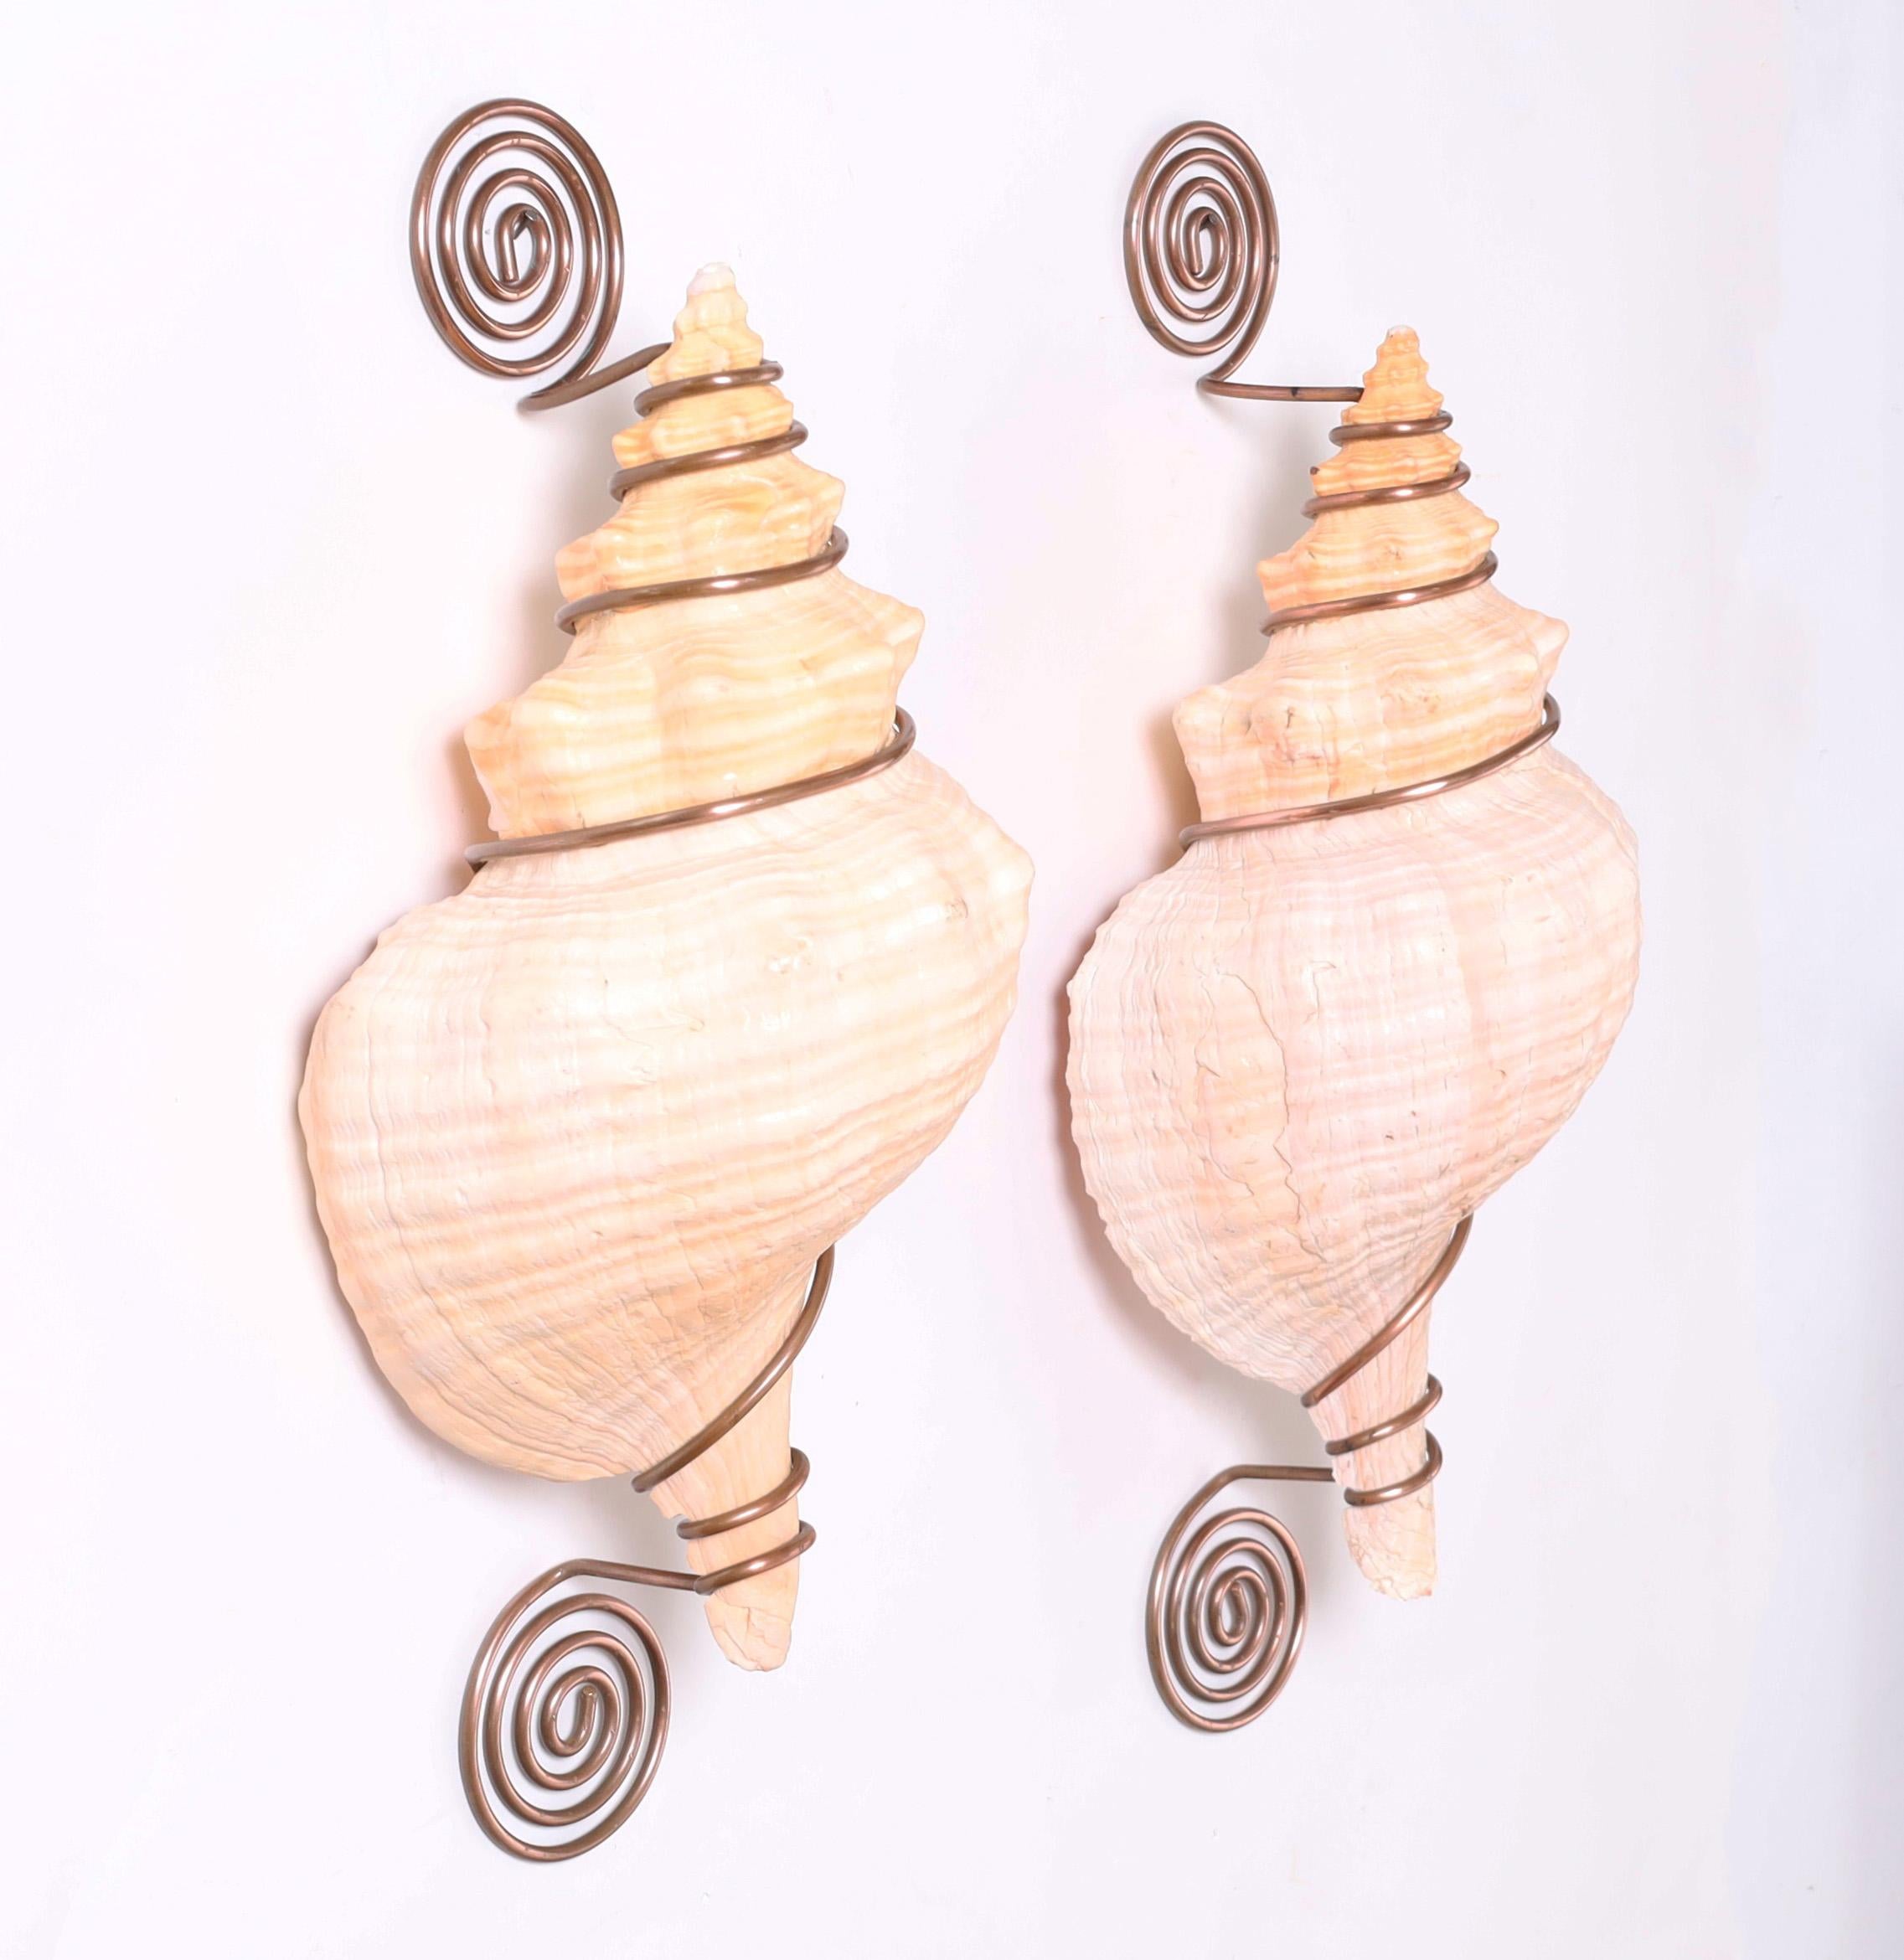 Other Organic Modern Pair of Conch Shell and Copper Wall Ornaments For Sale